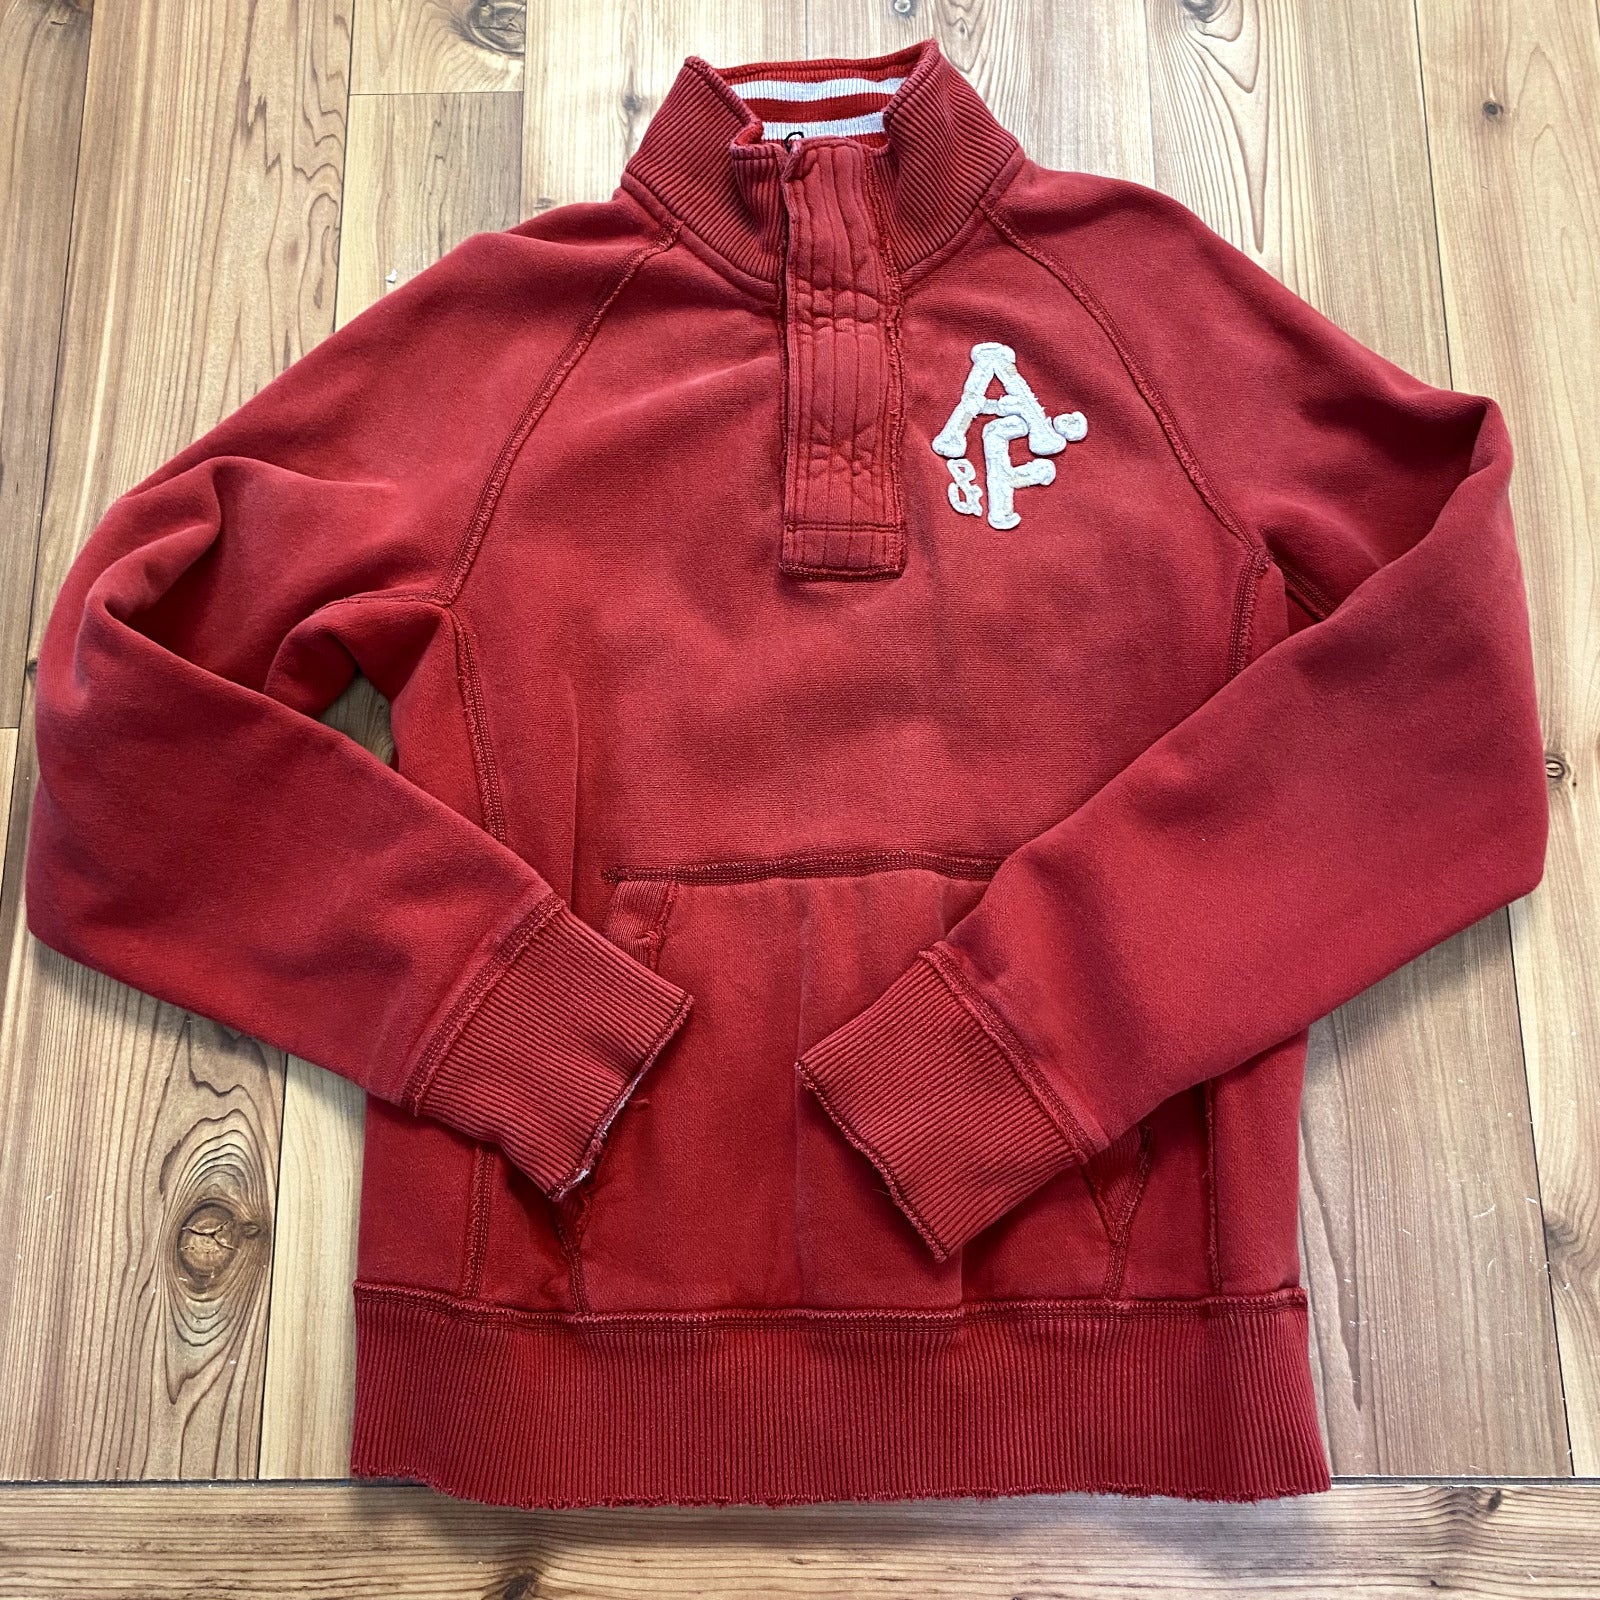 Abercrombie & Fitch Red Pullover Long Sleeve Muscle Sweatshirt Adult Size L